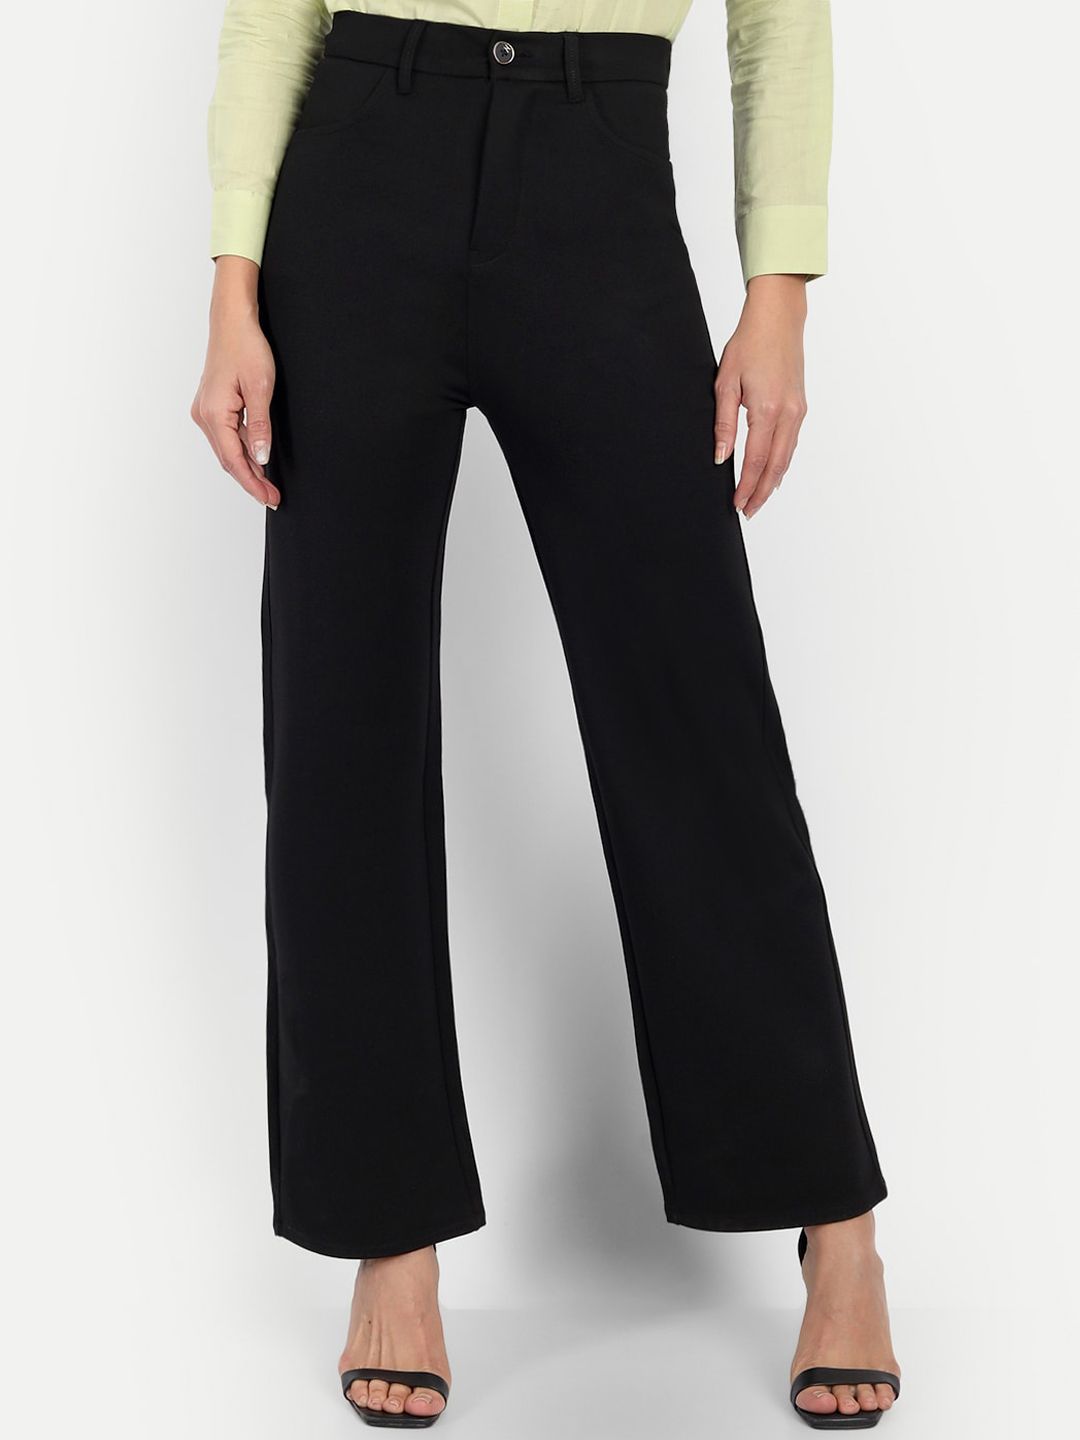 Next One Women Black Straight Fit High-Rise Easy Wash Trousers Price in India